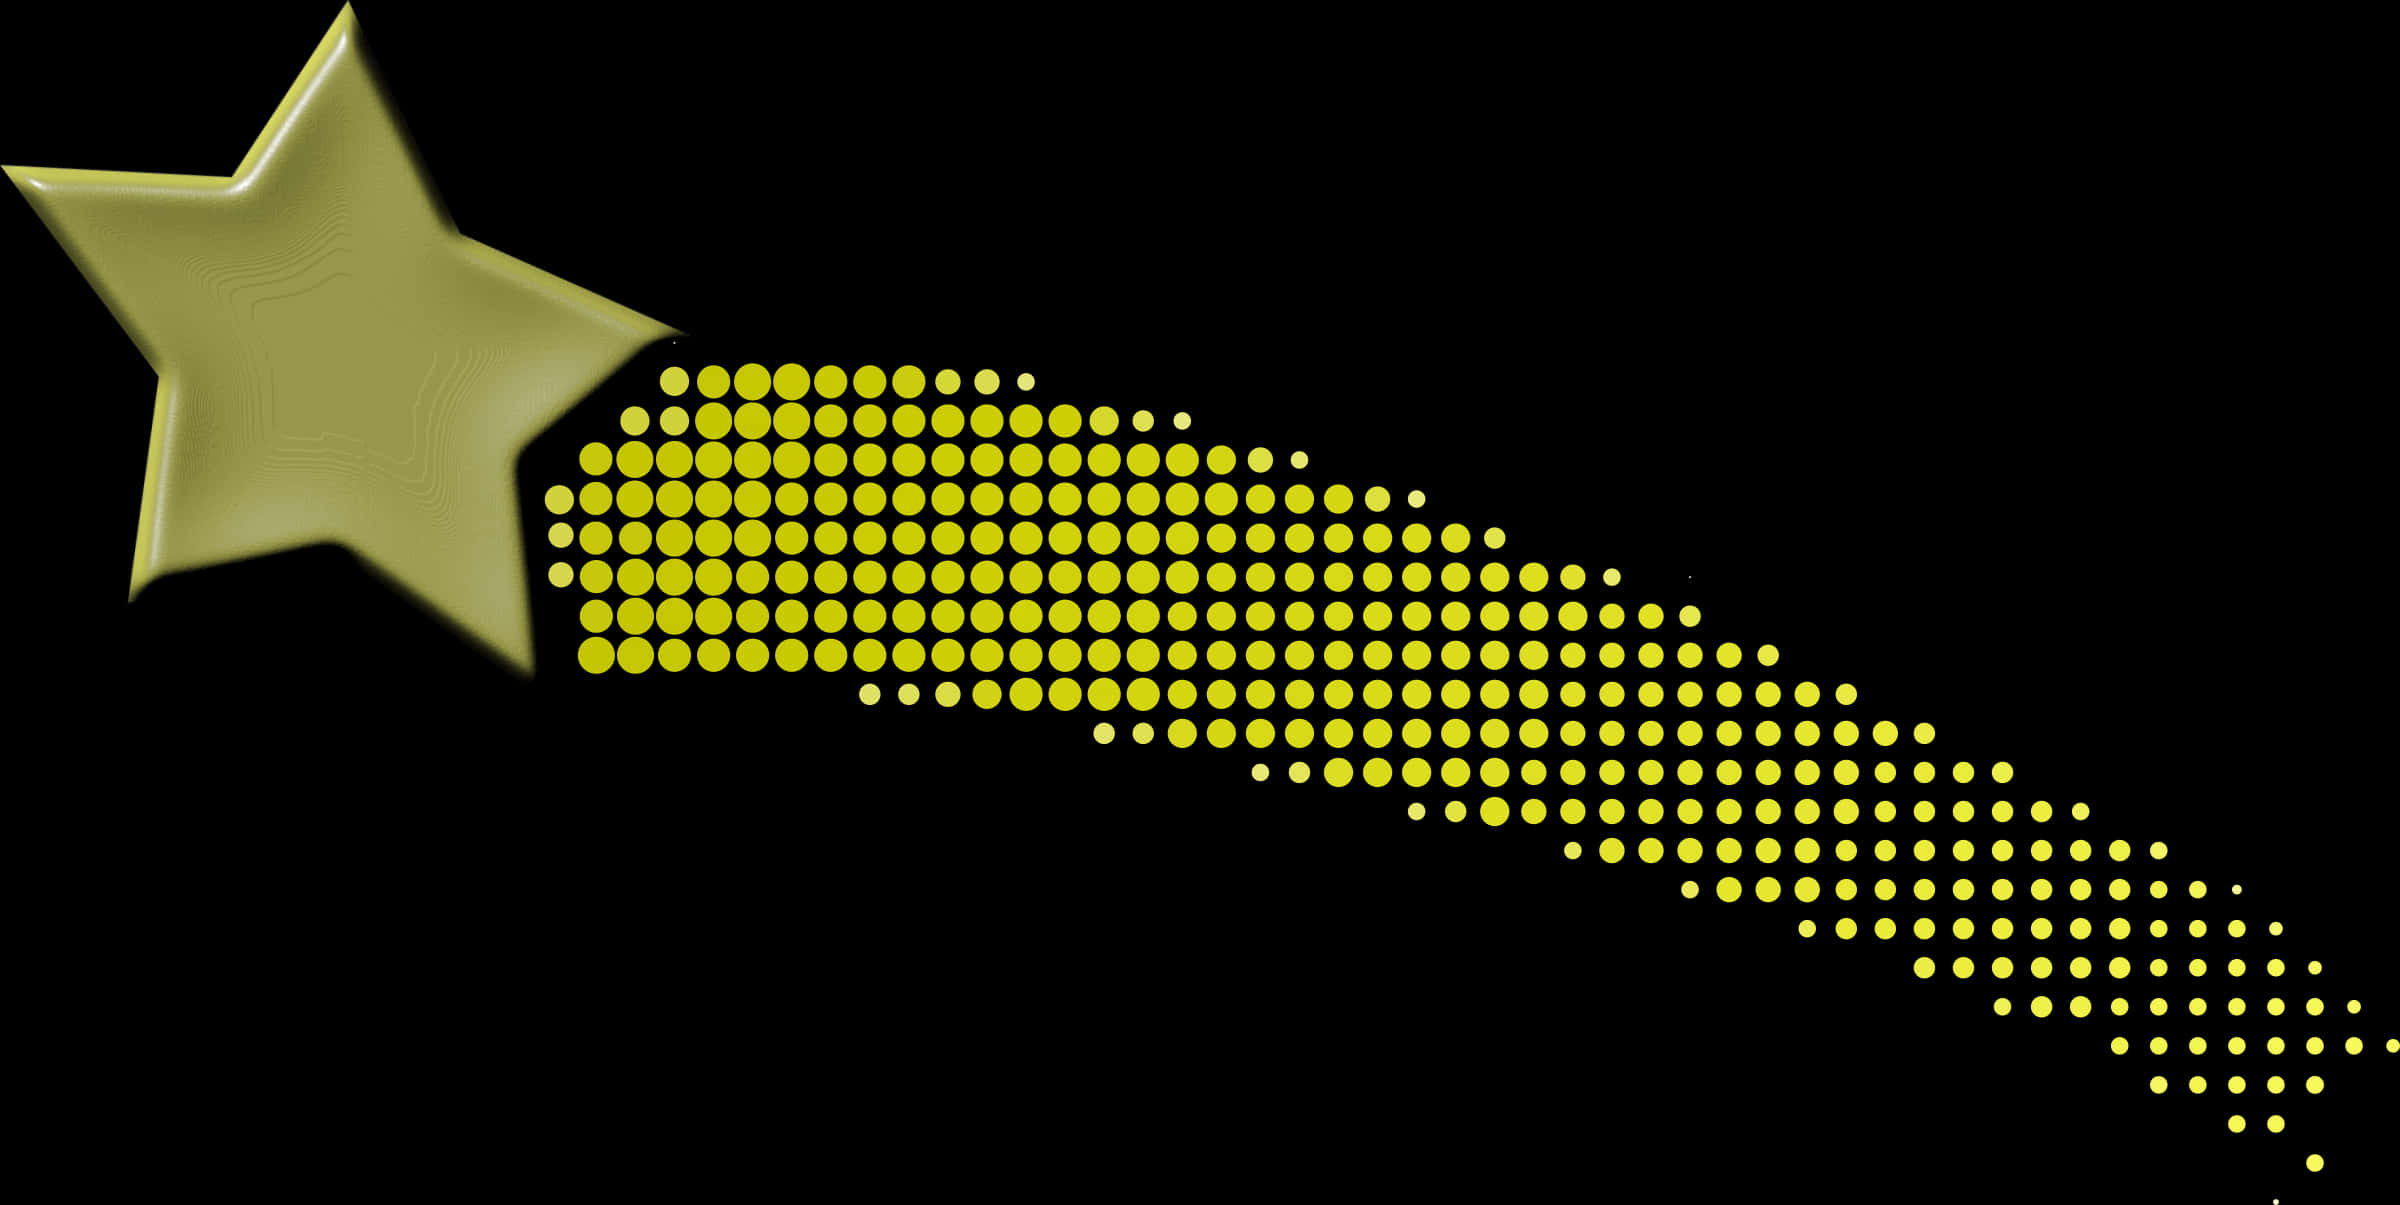 A Yellow Dotted Object With A Black Background